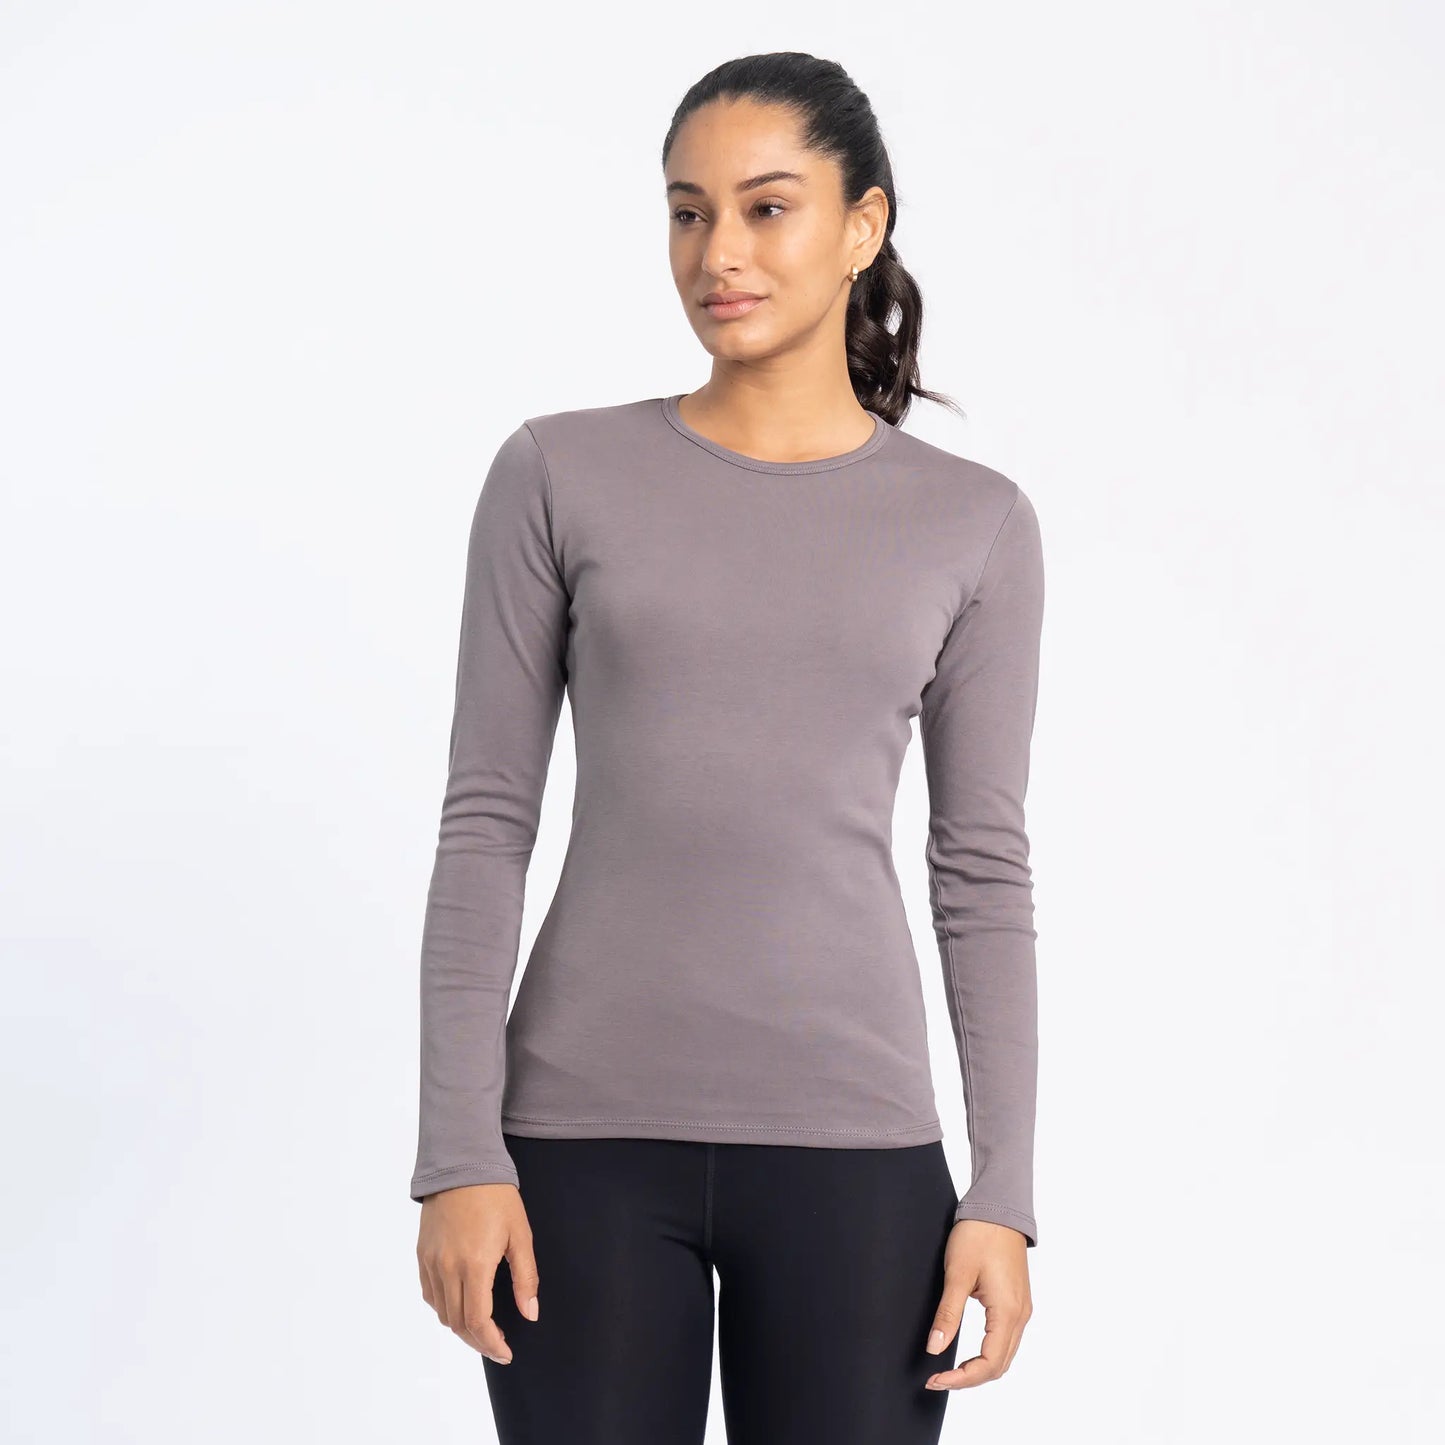 womens sustainable brand tshirt long sleeve color natural gray